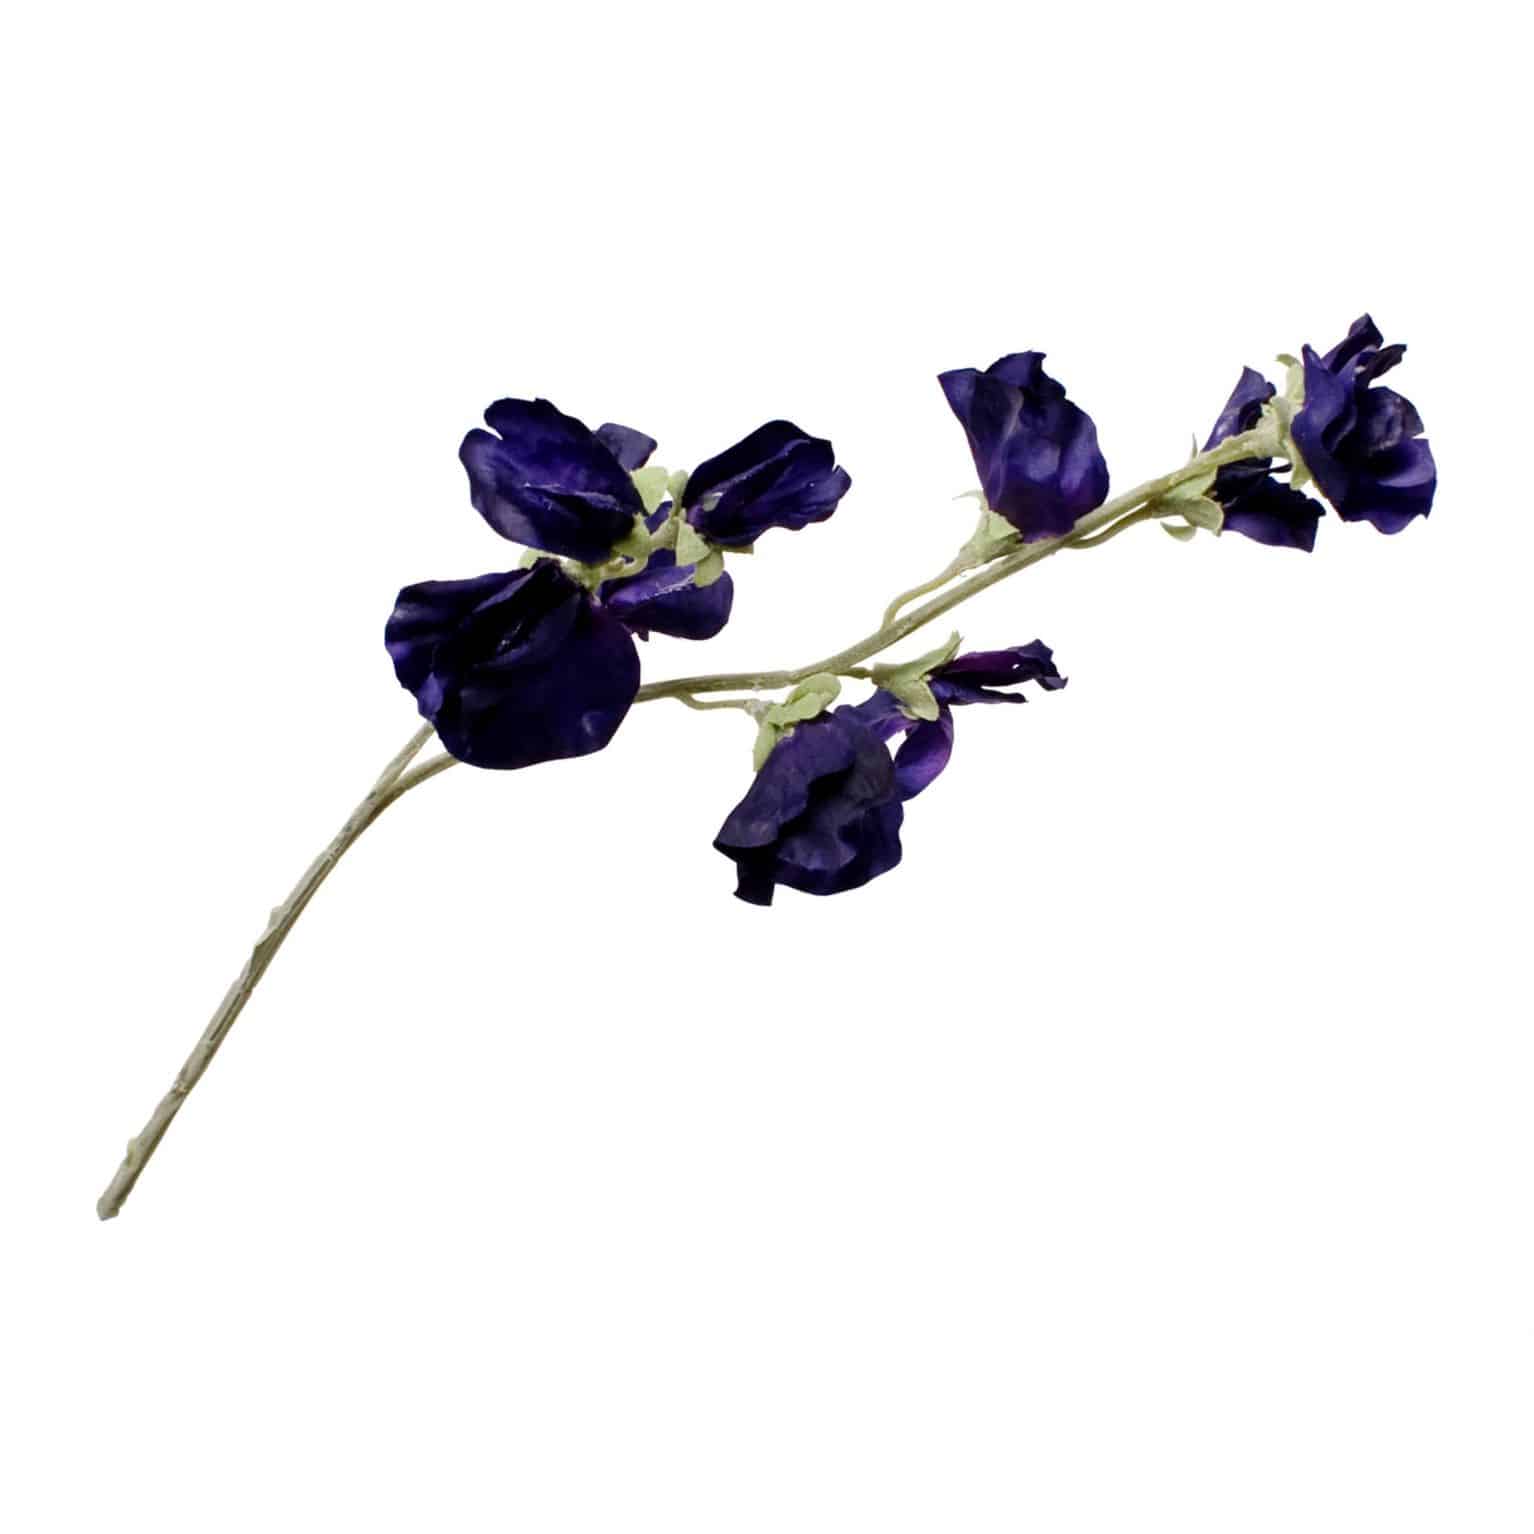 Buy dark purple faux sweet pea flowers in lifelike detail. A wonderful filler to any arrangement. The natural delicate petals add touches of colour.